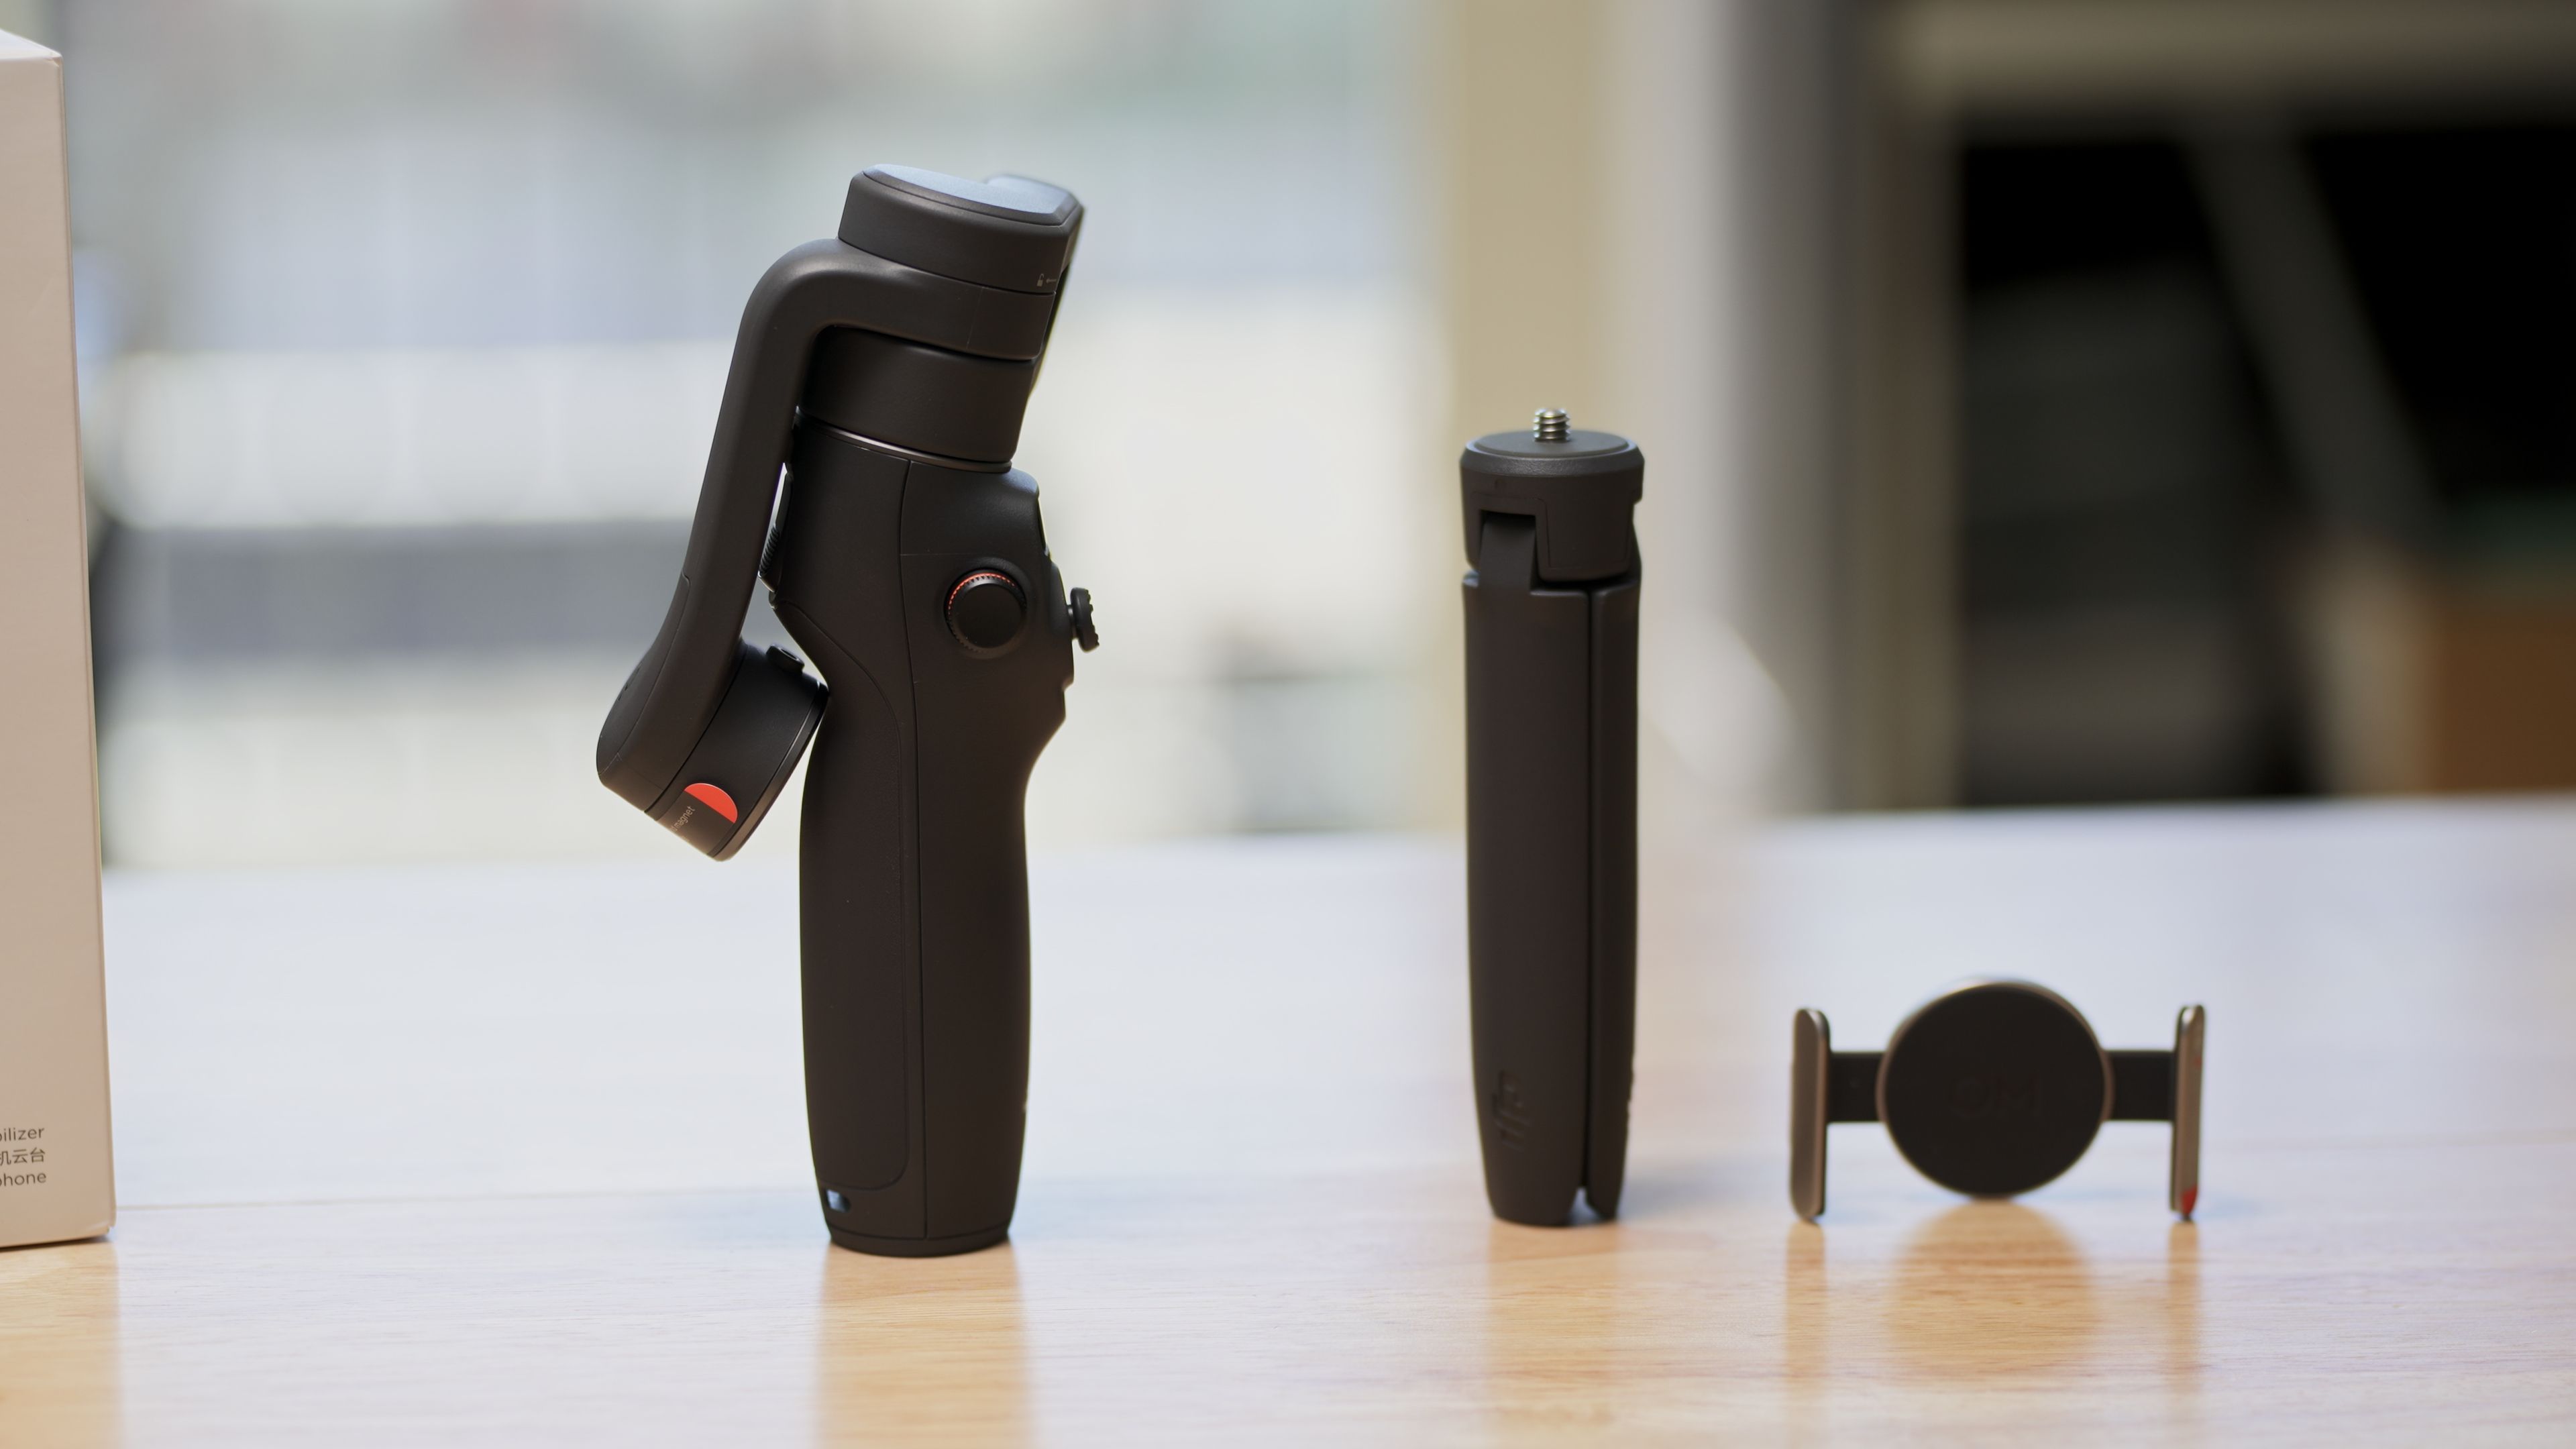 DJI announces Osmo Mobile 6 gimbal with ActiveTrack 5.0, control ring and  more: Digital Photography Review